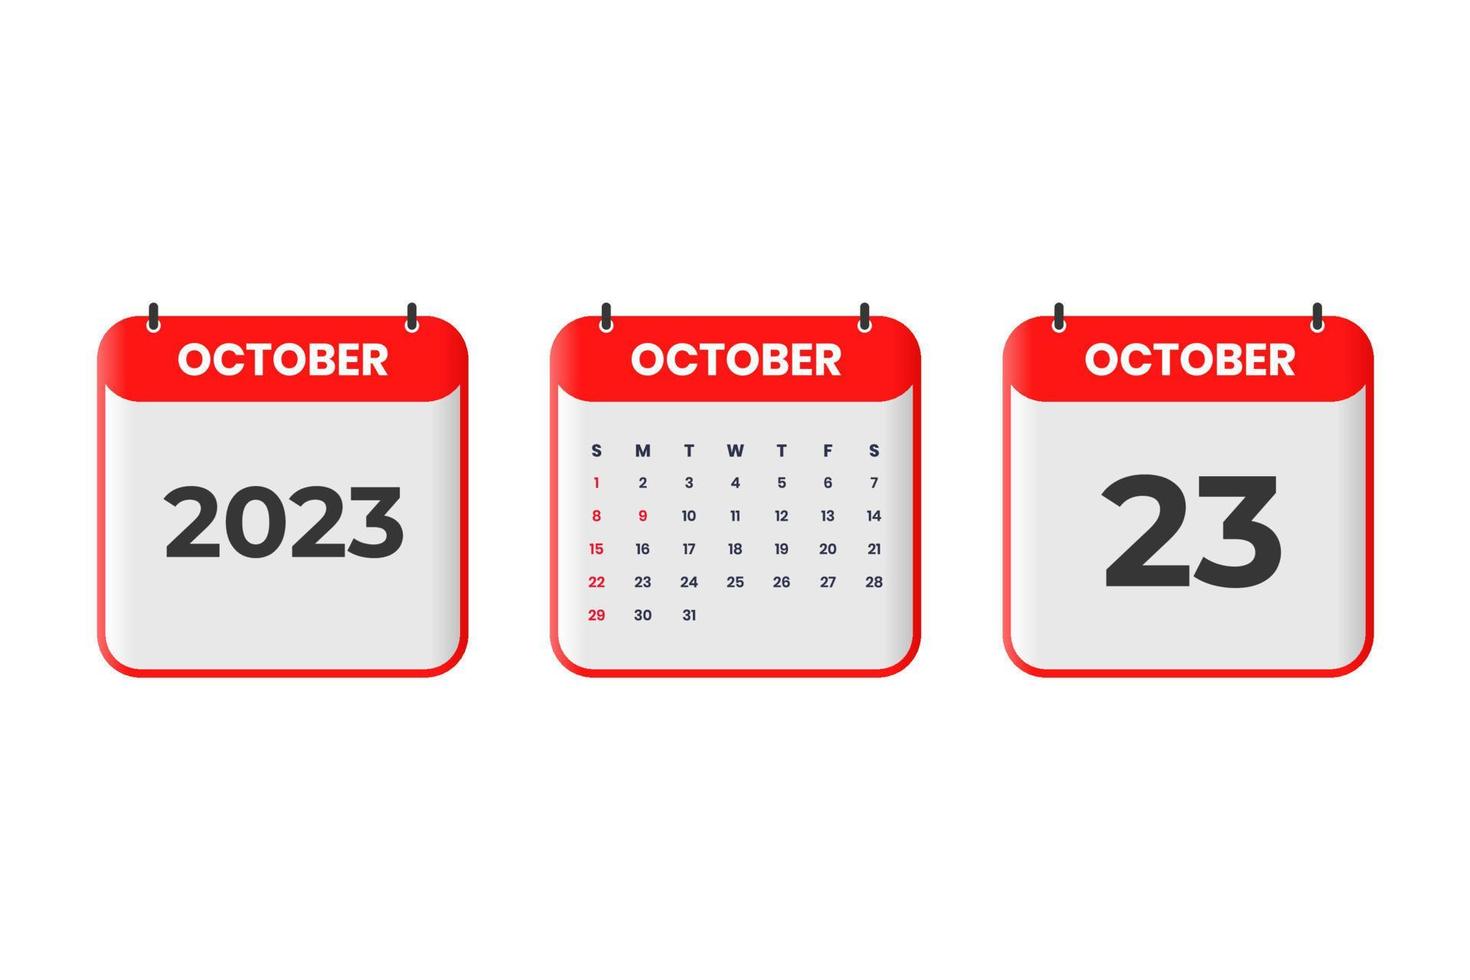 October 2023 calendar design. 23rd October 2023 calendar icon for schedule, appointment, important date concept vector